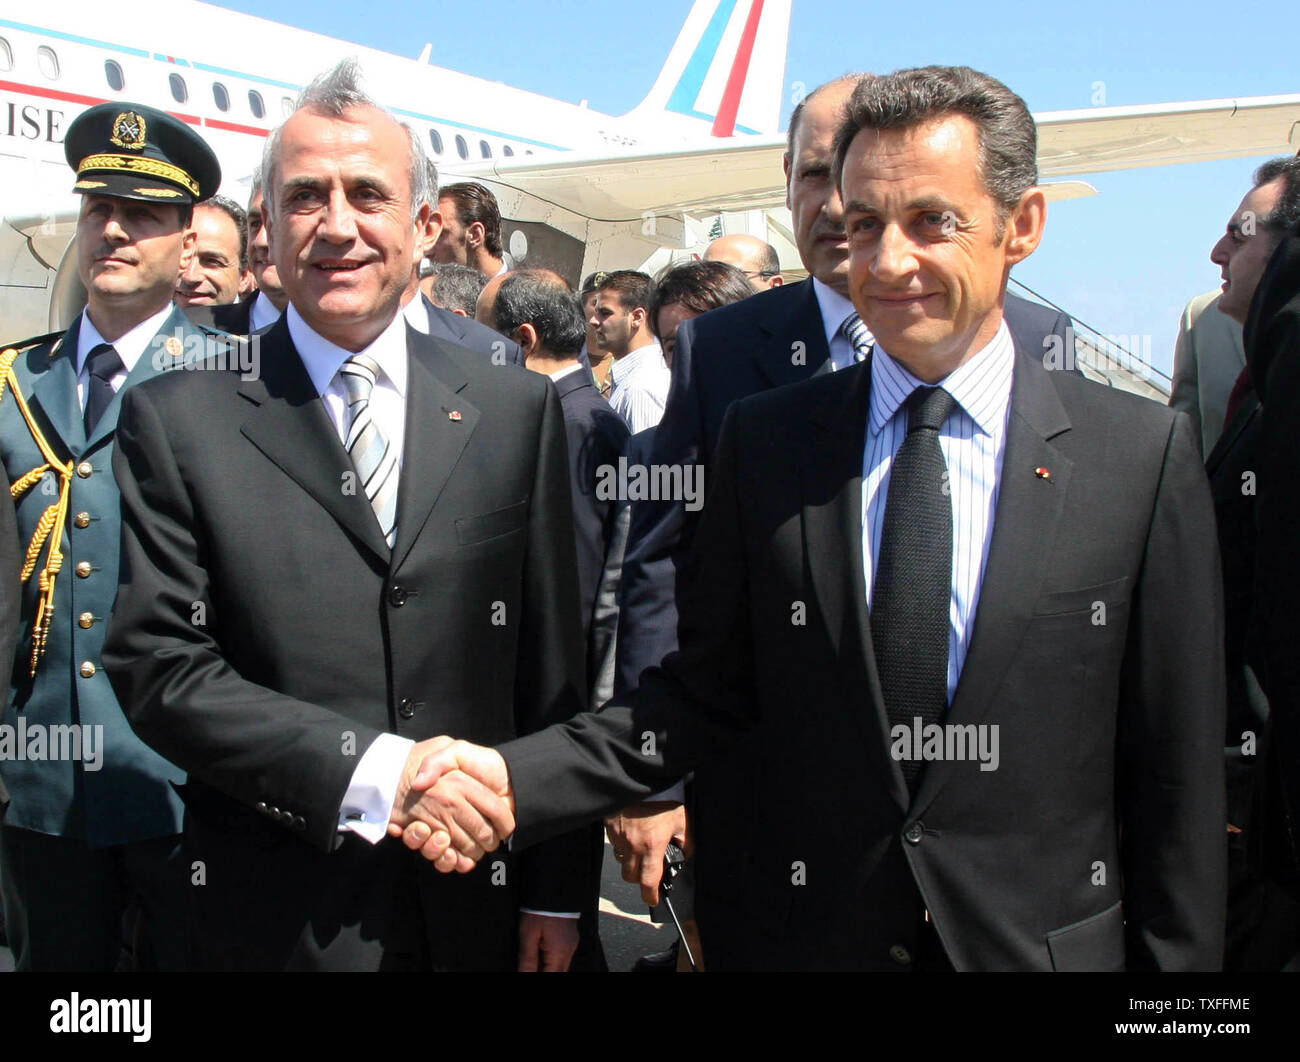 French President, Nicolas Sarkozy (R) is greeted by Lebanon’s recently elected president, Michel Suleiman at Beirut airport on June 7, 2008. Sarkozy is the first western head of state to meet Suleiman since the former army chief was elected president on May 25, following a Qatari-brokered deal to end the 18 month political stand off between the Lebanese government and the Hezbollah backed opposition. (UPI Photo/Dalati & Nohra) Stock Photo